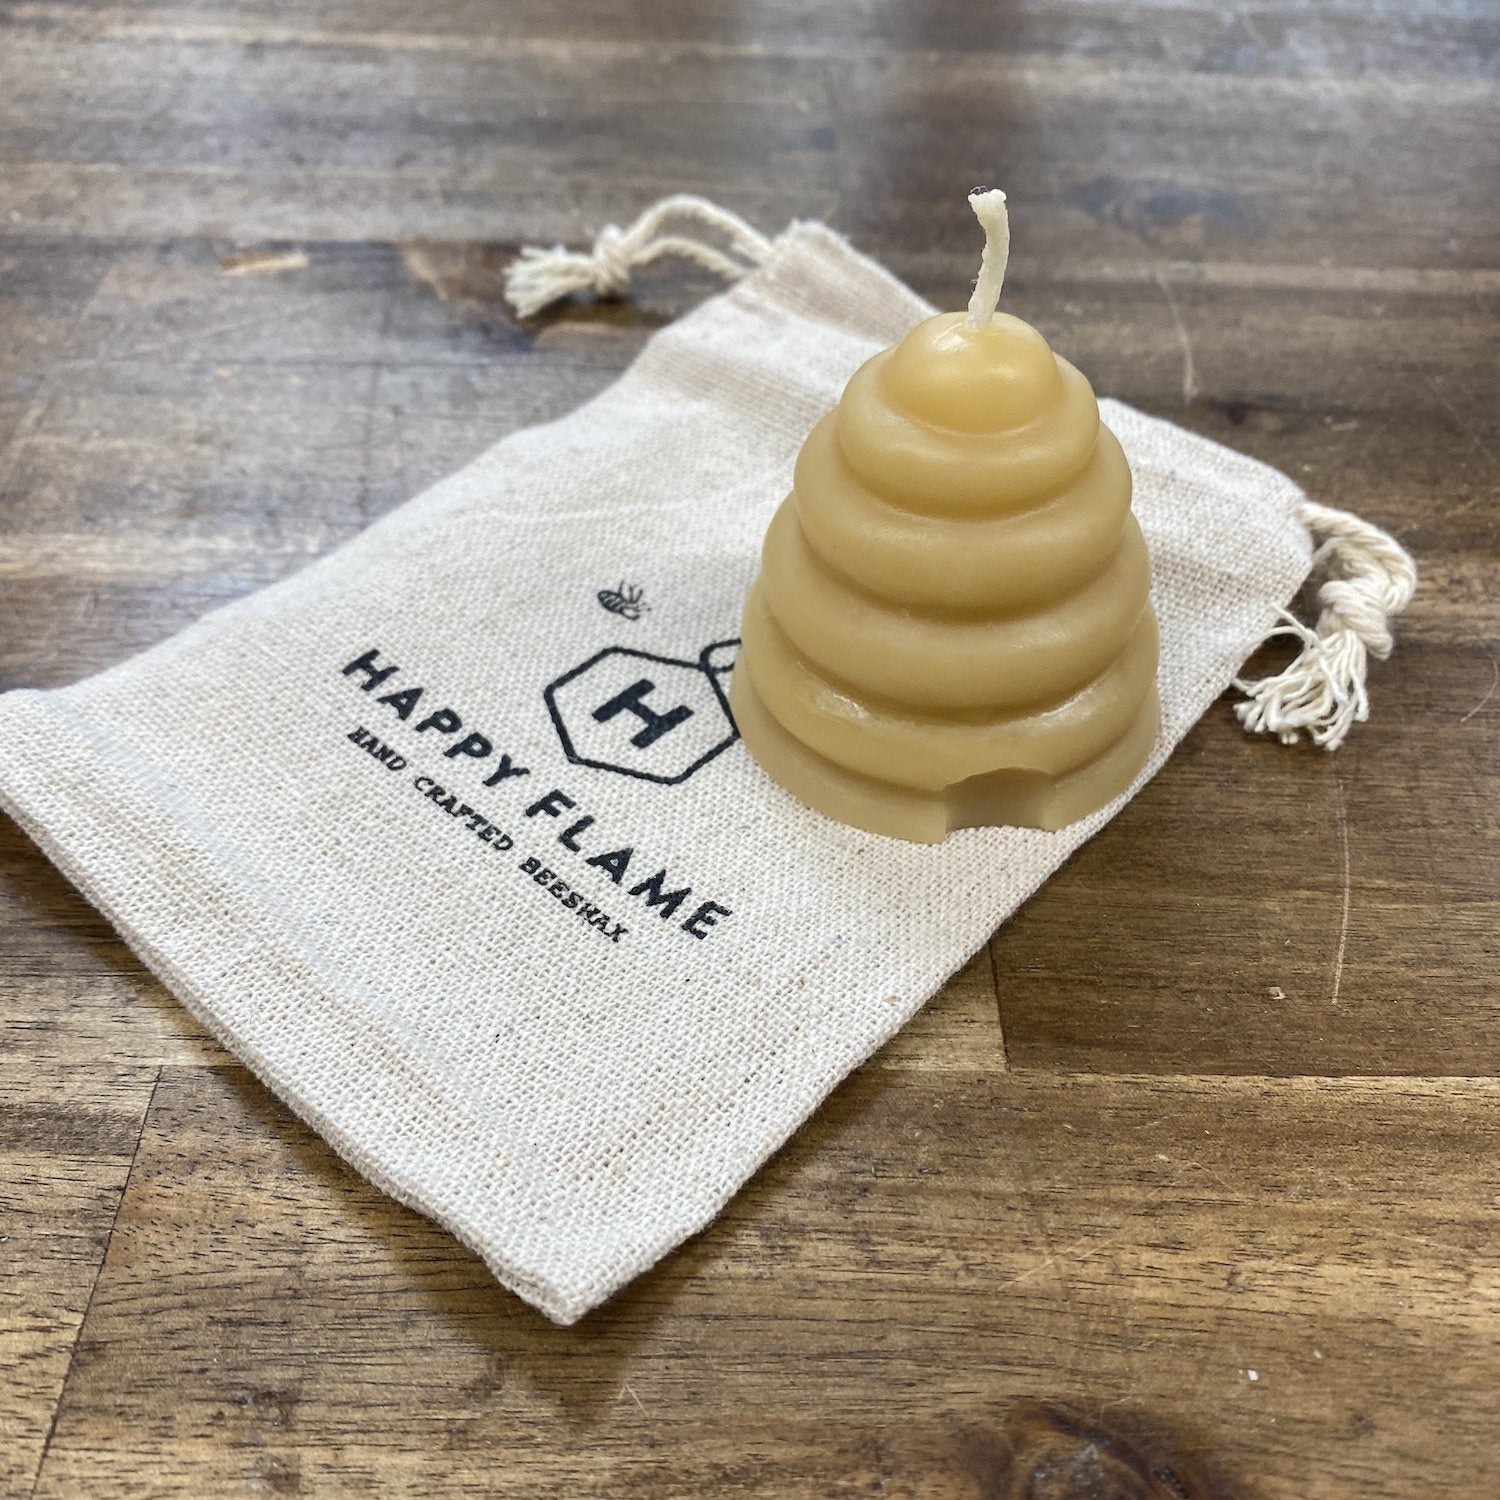 Beehive skep candles- hand crafted from Australian Certified organic beeswax Decorative Happy Flame 1 x Beehive skep candle in a cotton bag 